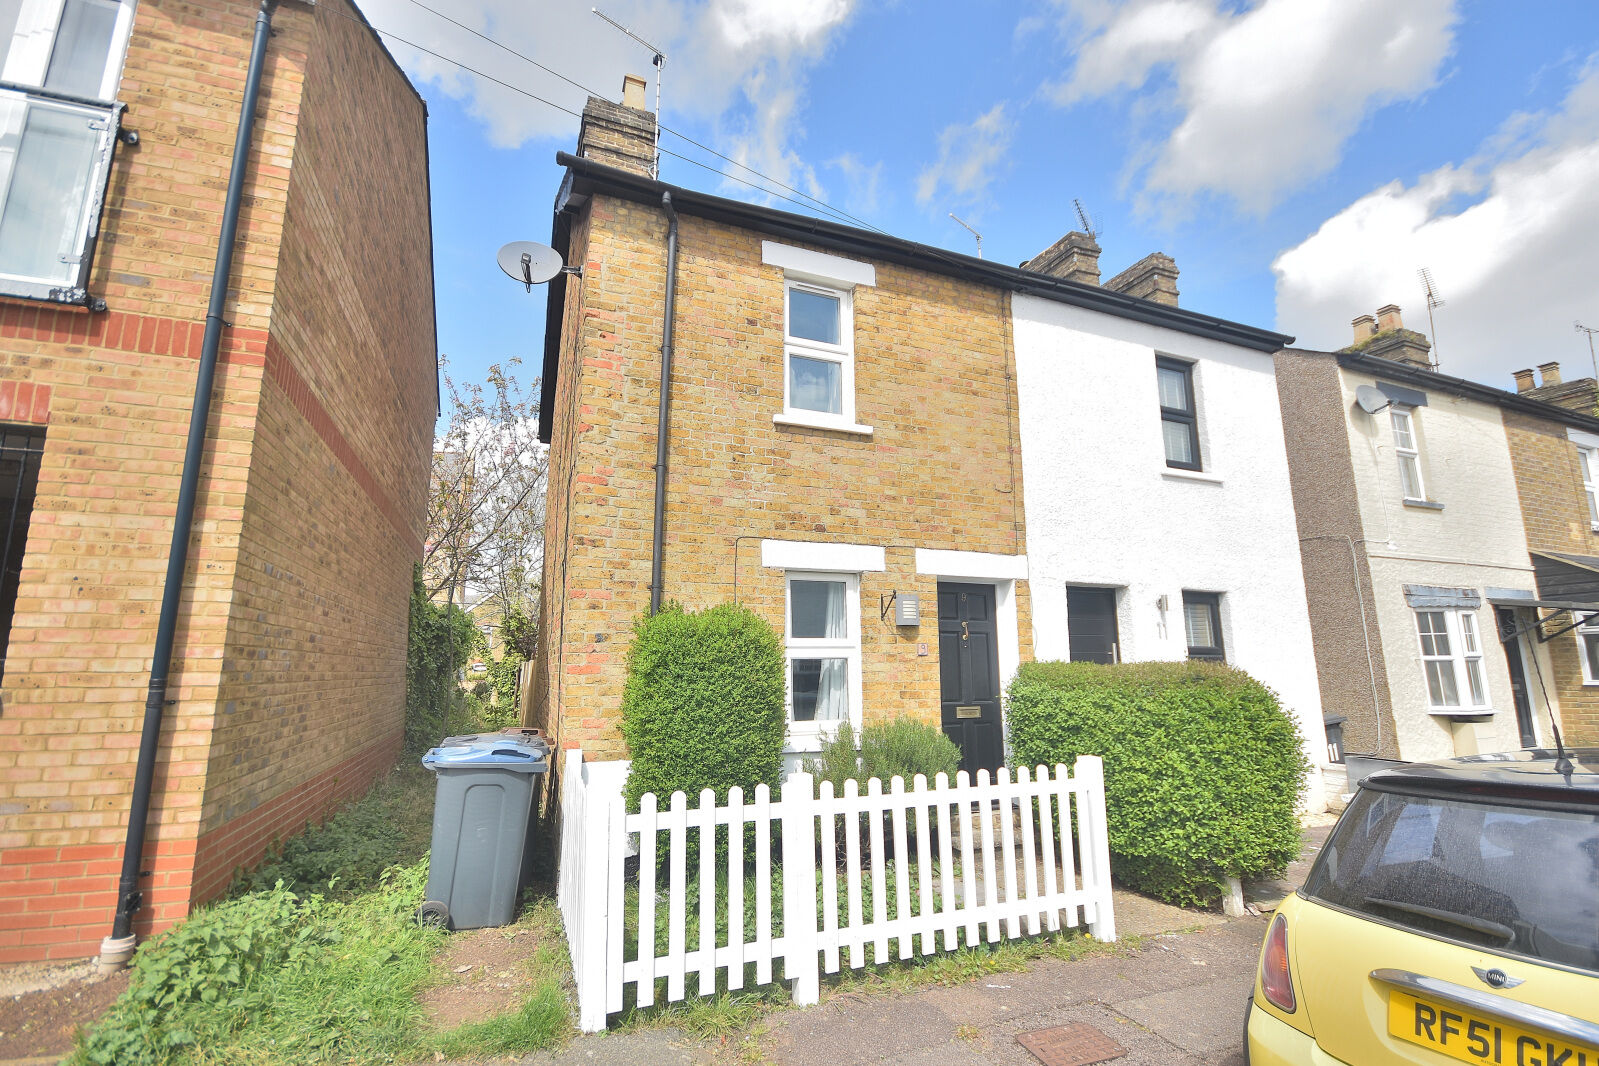 2 bedroom semi detached house to rent, Available from 10/05/2024 Wharf Road, Bishop's Stortford, CM23, main image